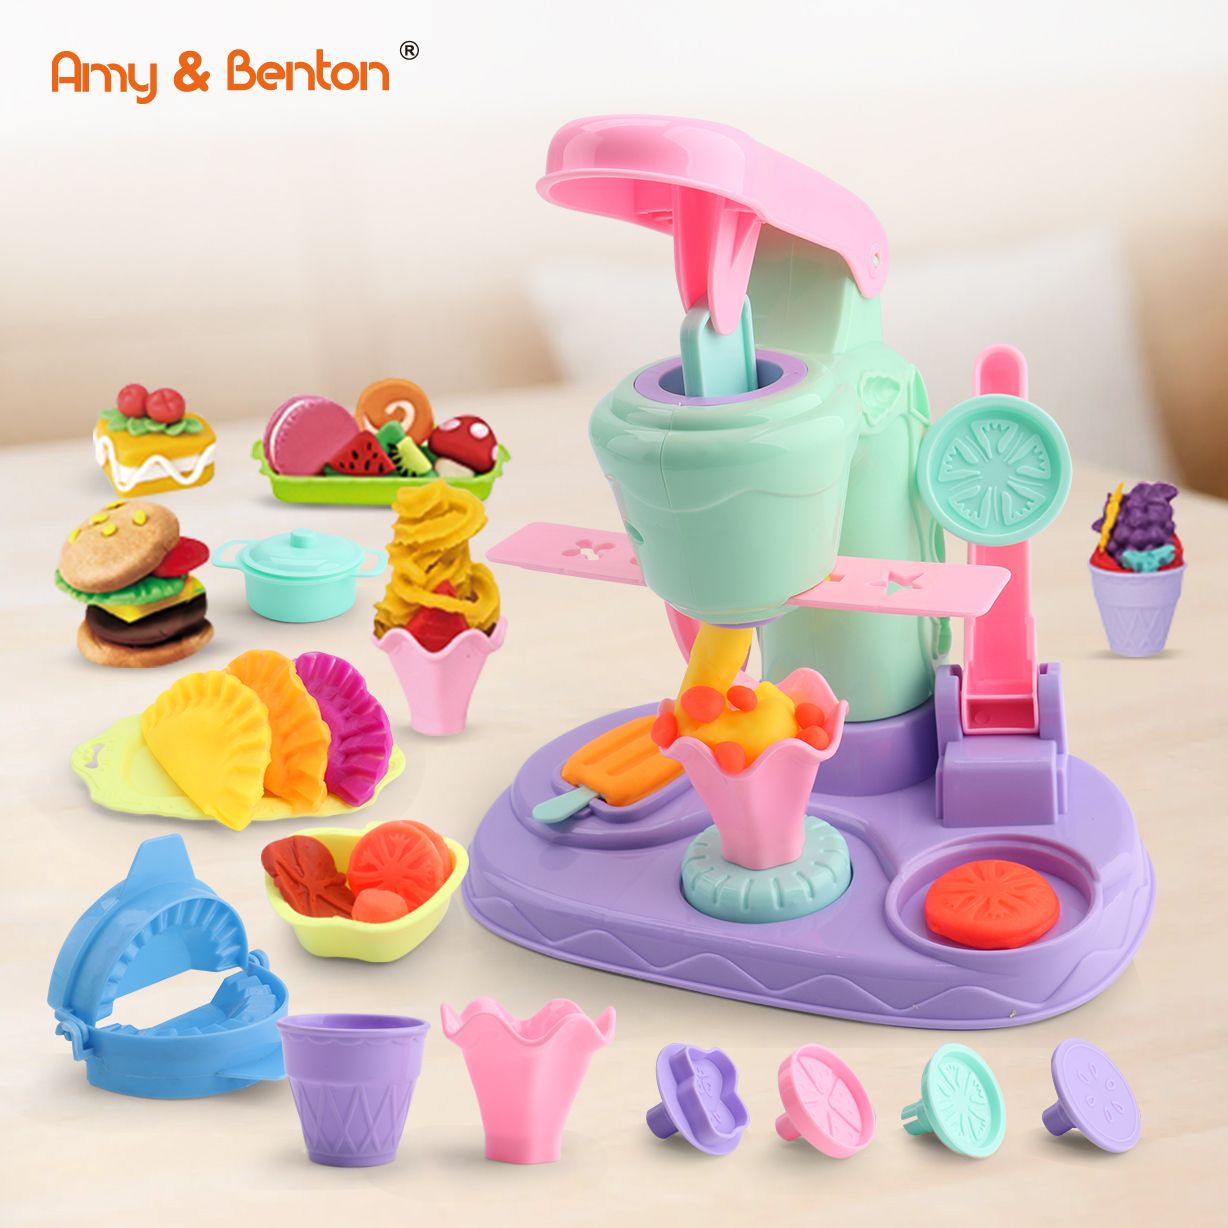 75 PCS Ice Cream Maker Machine Kitchen Creations Popsicle Frozen Pretend Playset and Playdough Tool Set Gifts for Kids